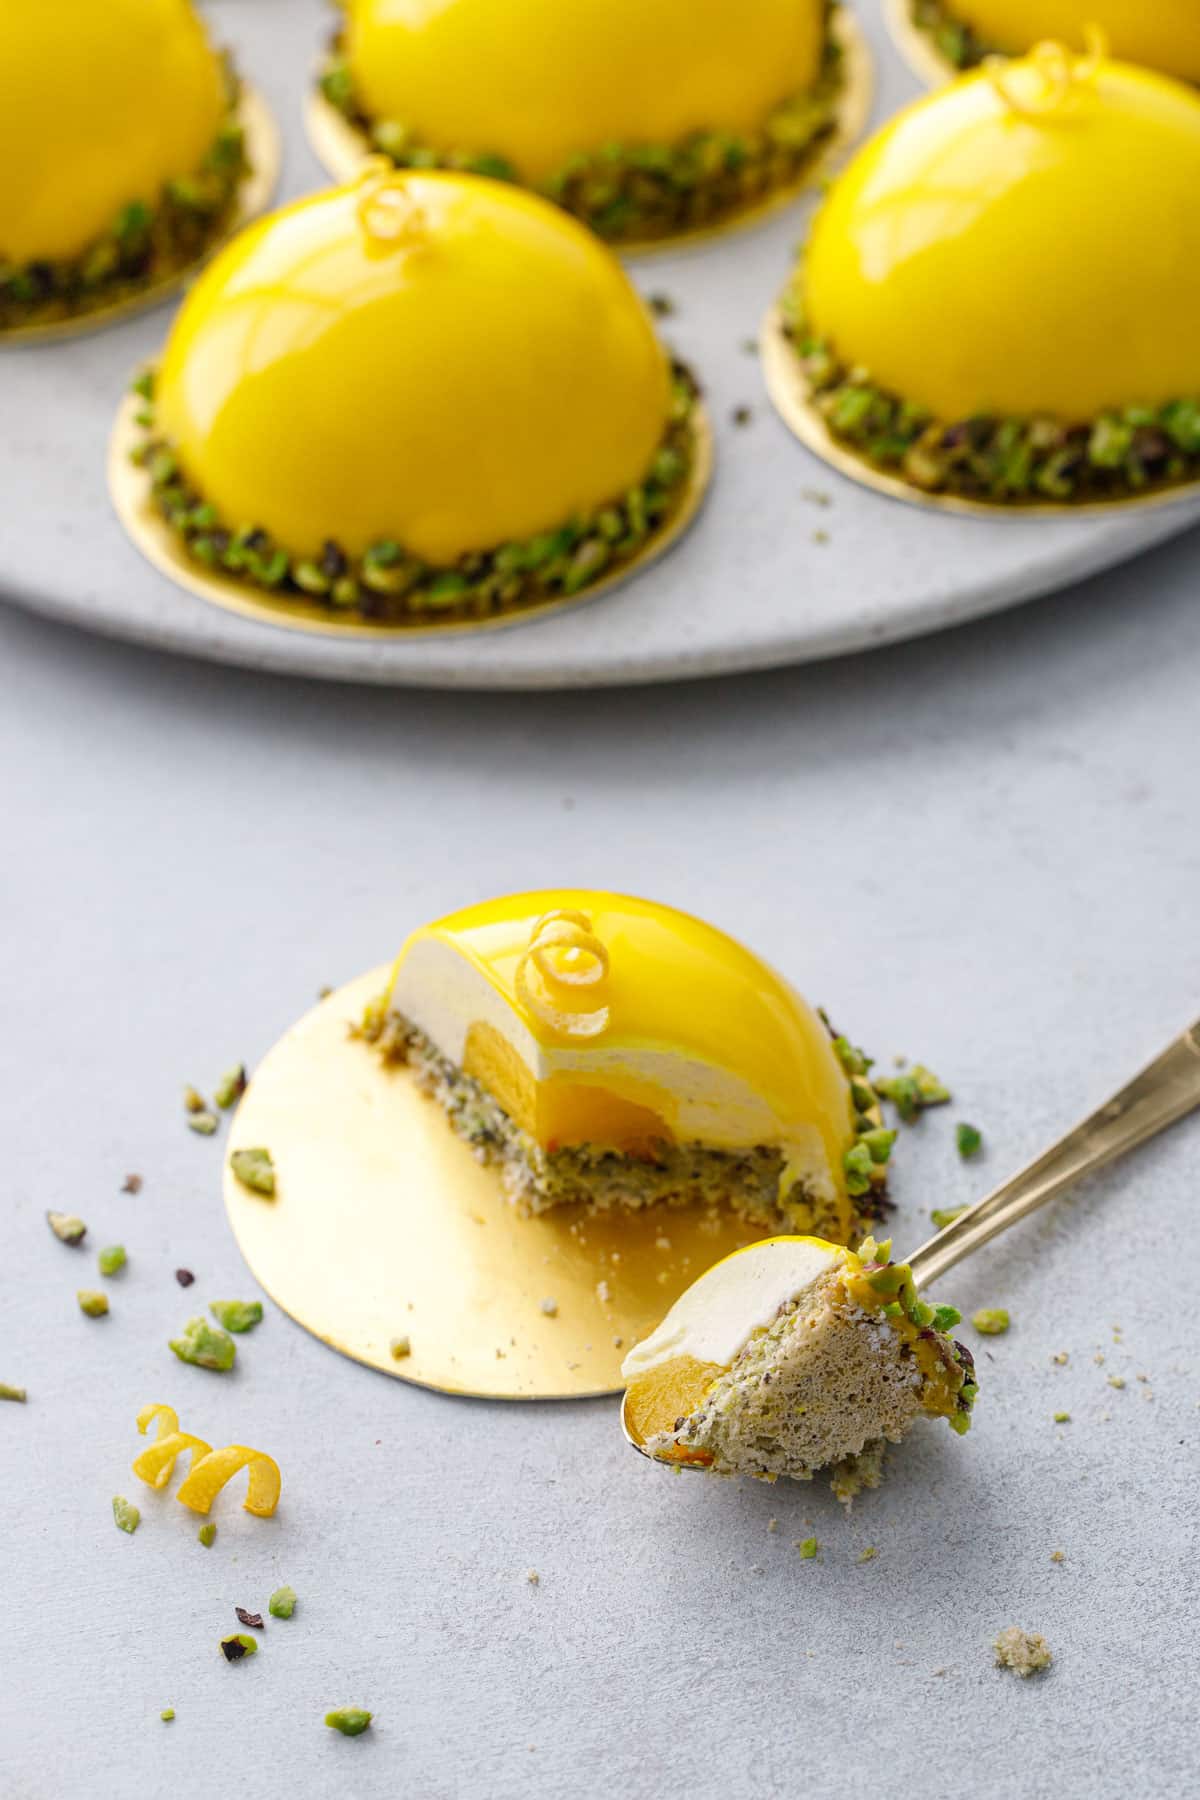 Pistachio & Meyer Lemon Mousse Cake on a gold cake board with a bite taken out of it so it shows the distinct layers and textures inside.